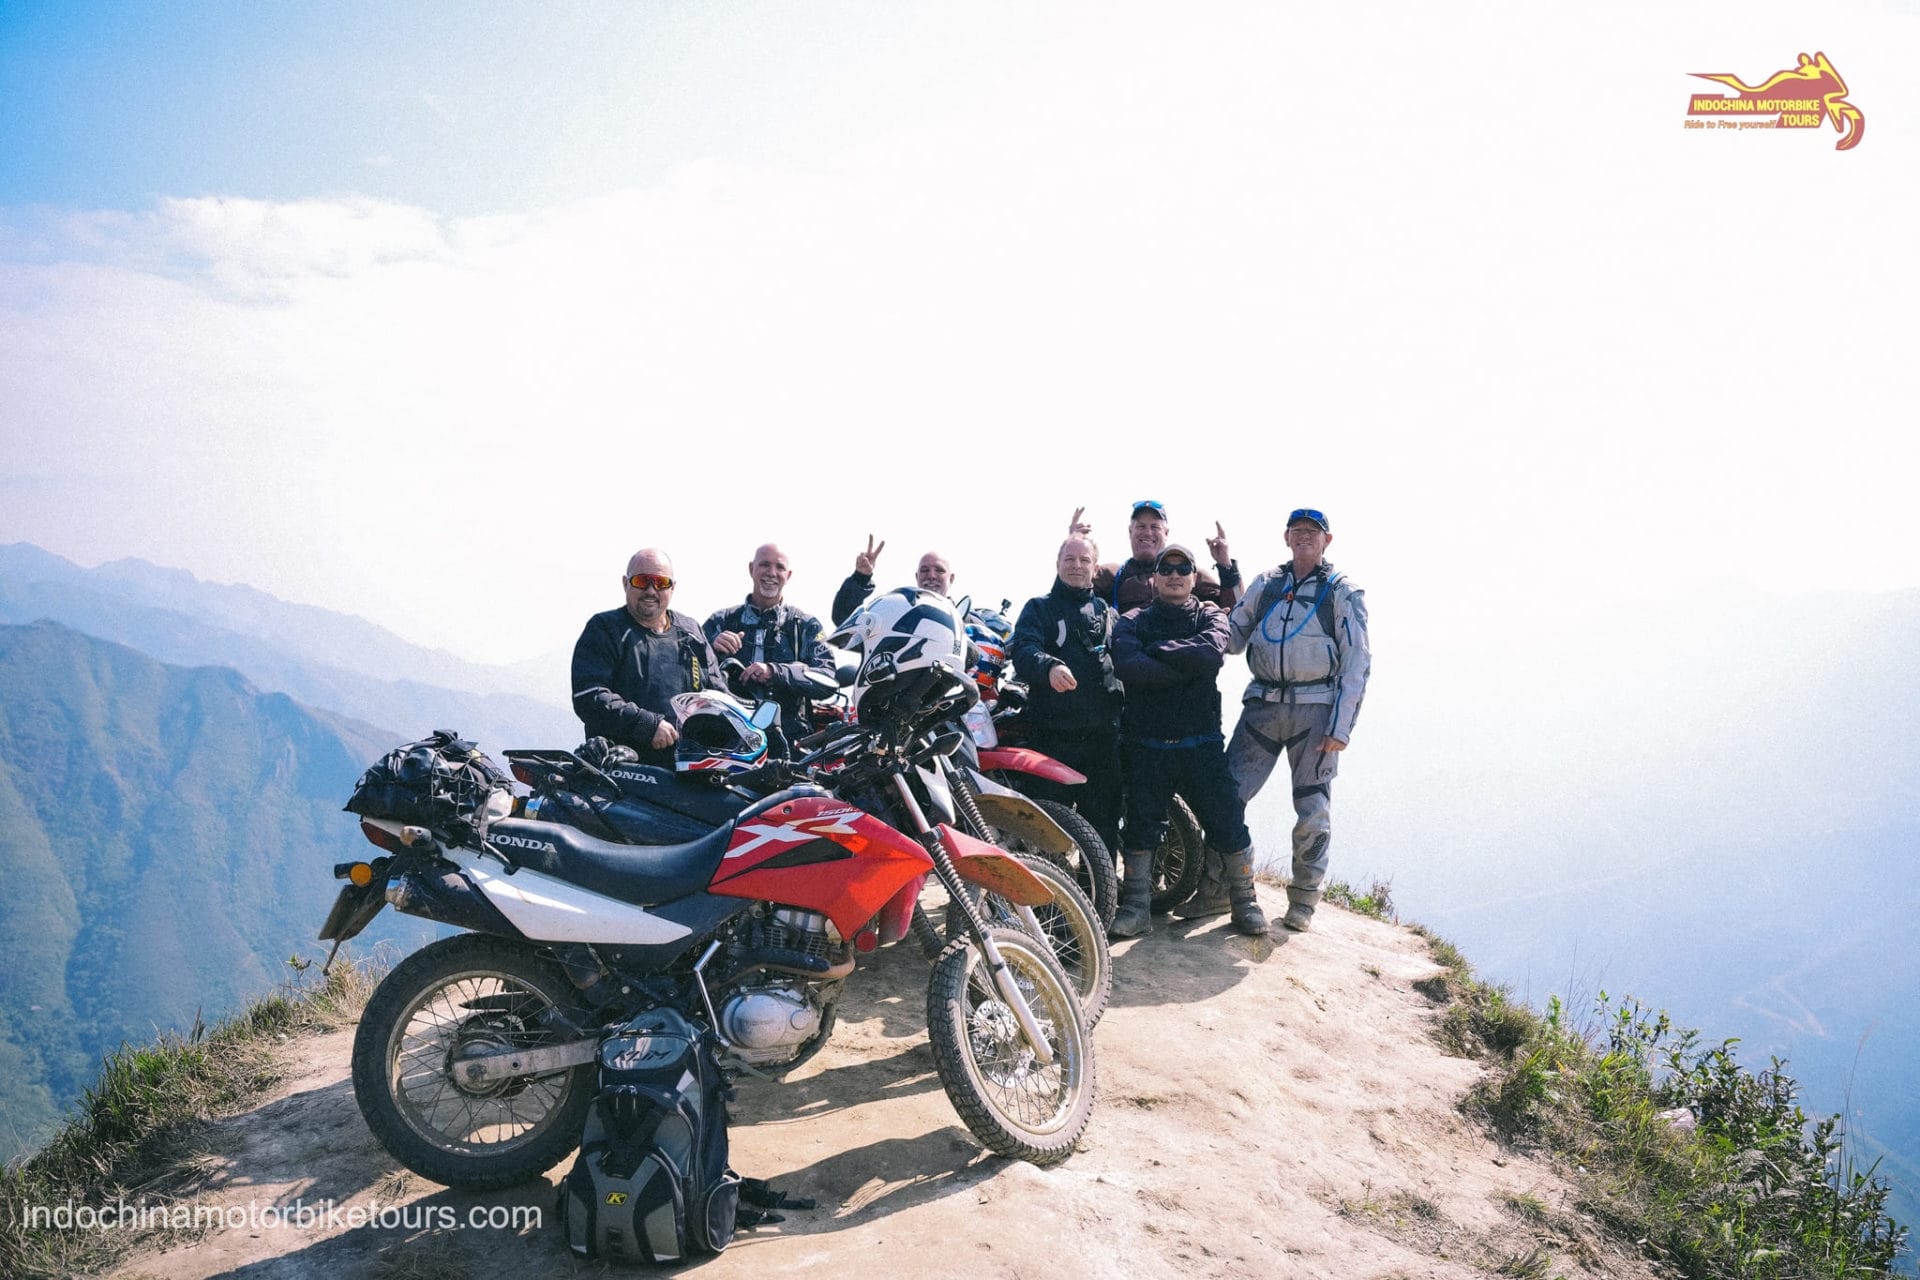 Mind-Blowing Northern Vietnam Dirt Bike Tour For Experienced Riders